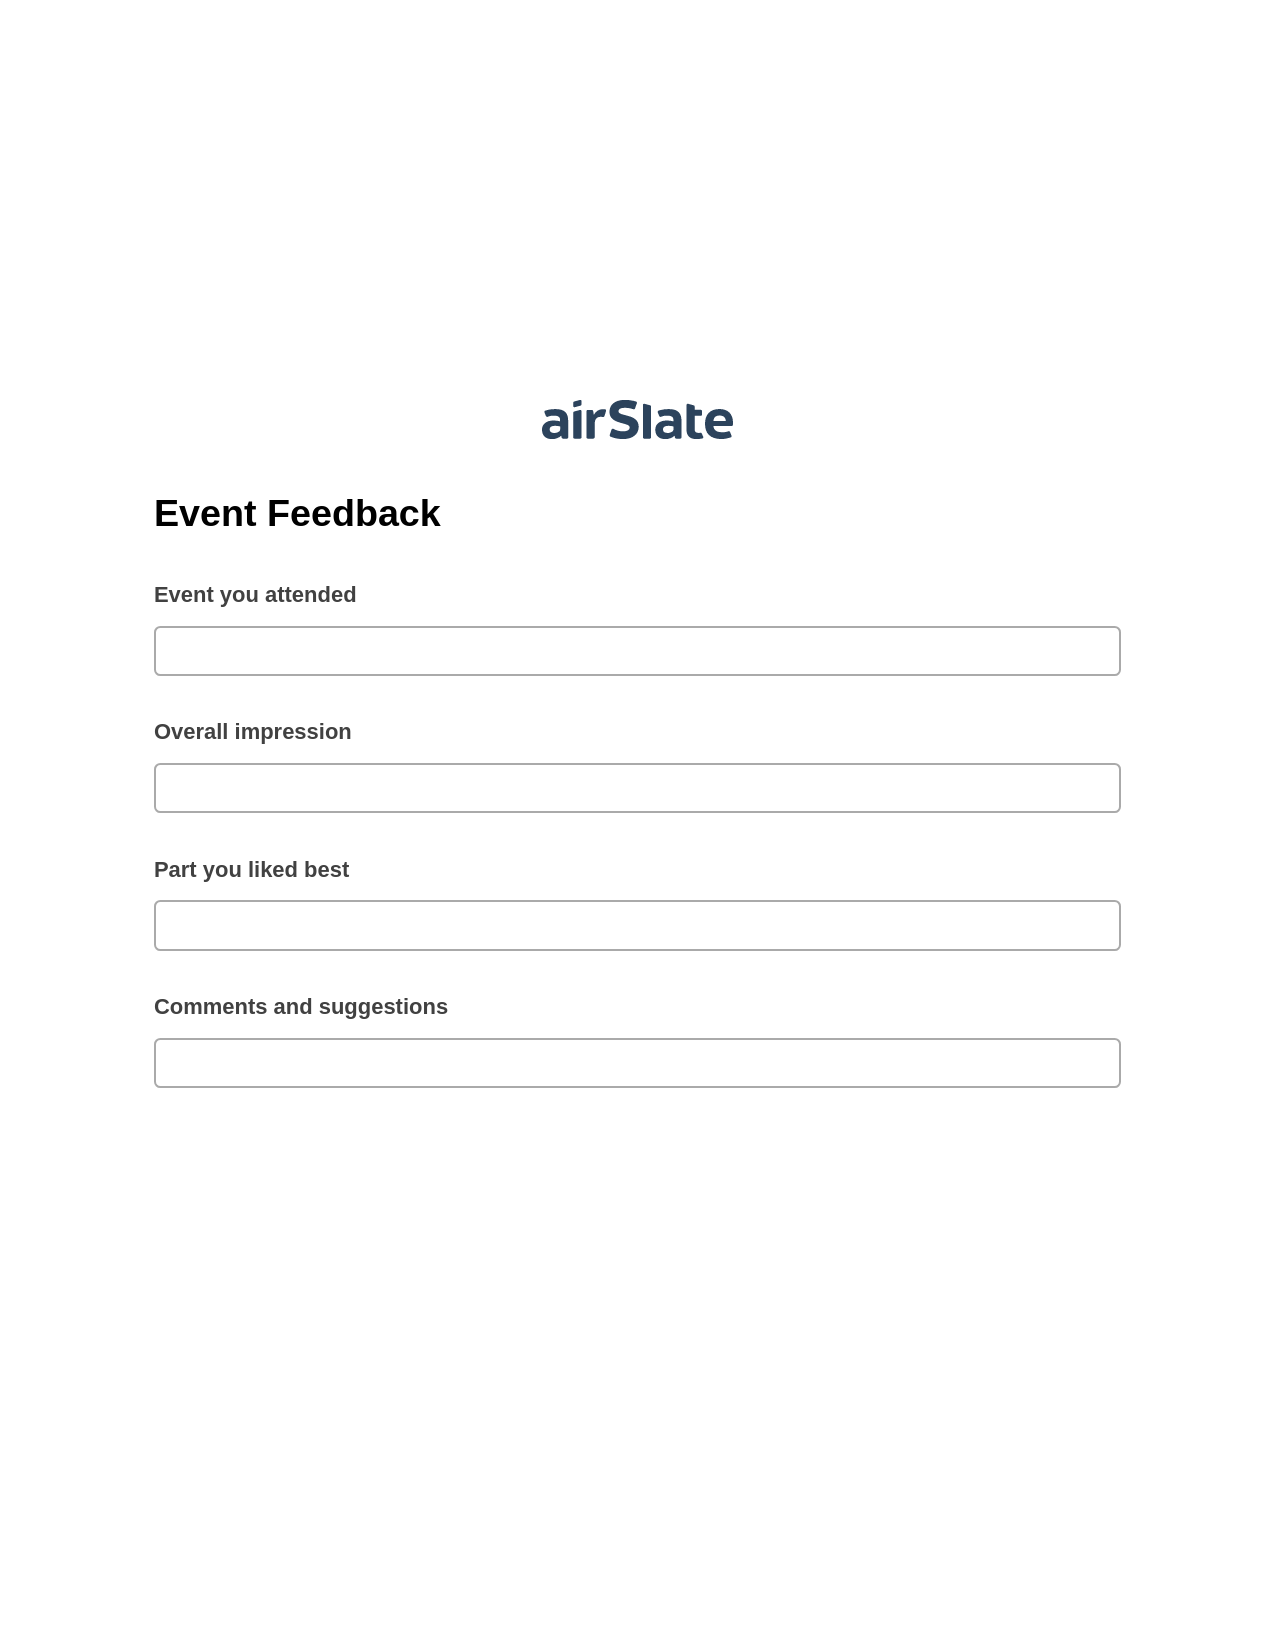 Event Feedback Pre-fill from Salesforce Record Bot, Mailchimp add recipient to audience Bot, Export to Excel 365 Bot